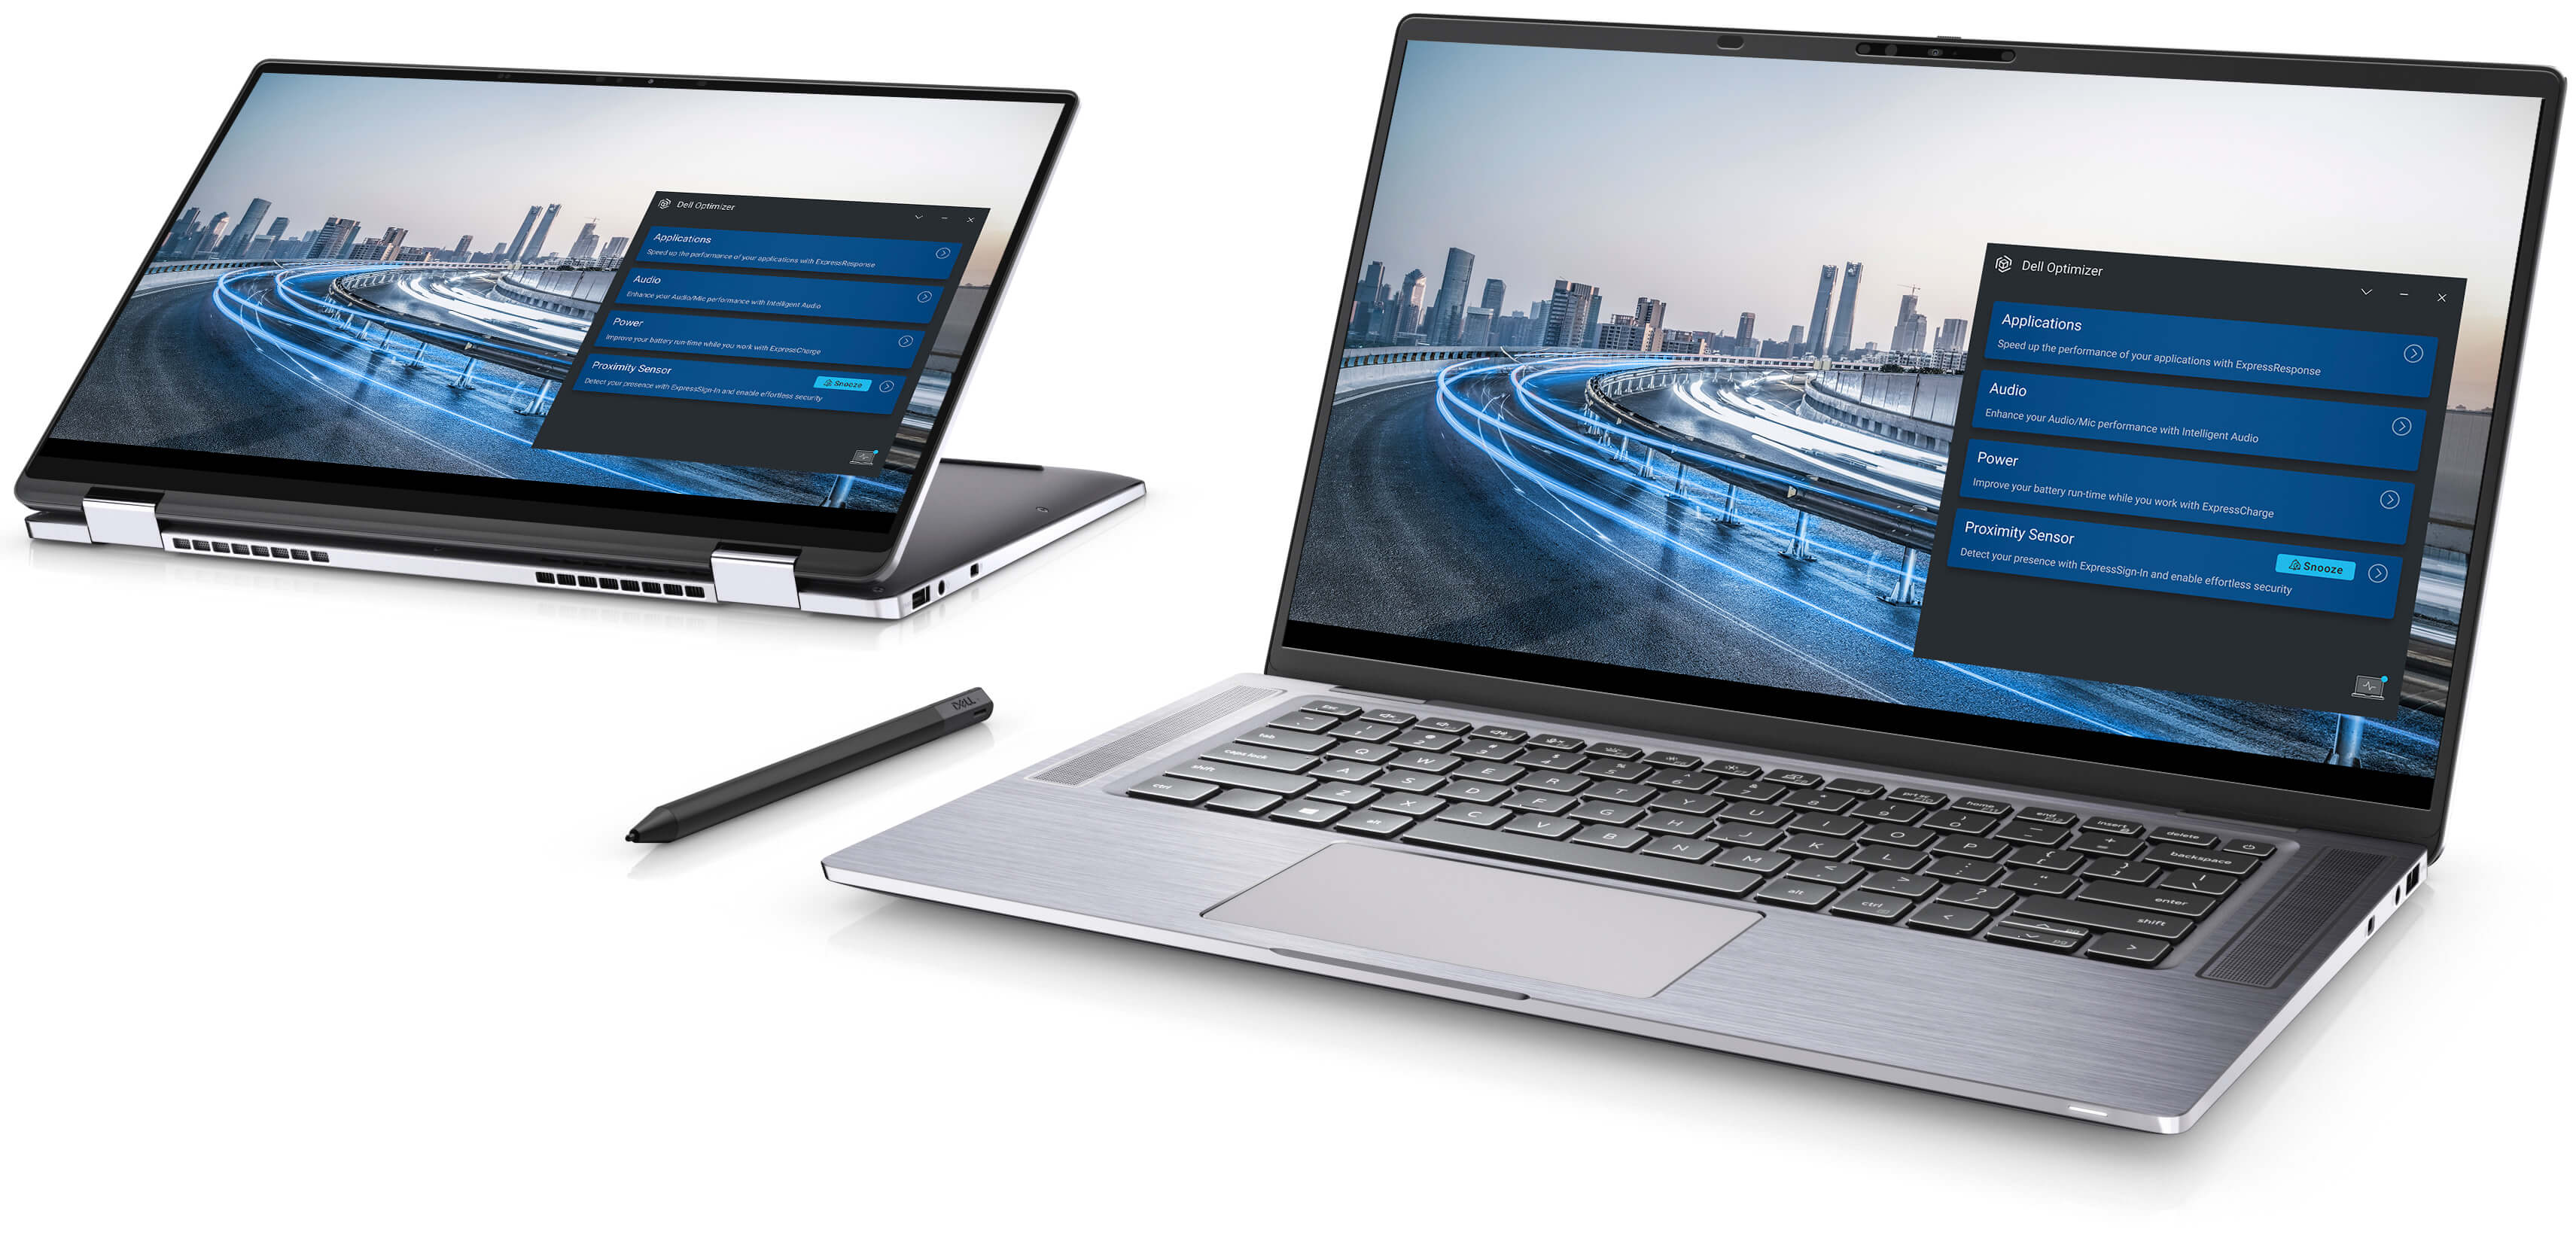 Ces Dell Latitude 9510 Laptops Features 5g Connectivity Up To 30 Hours Battery Life Mysmartprice